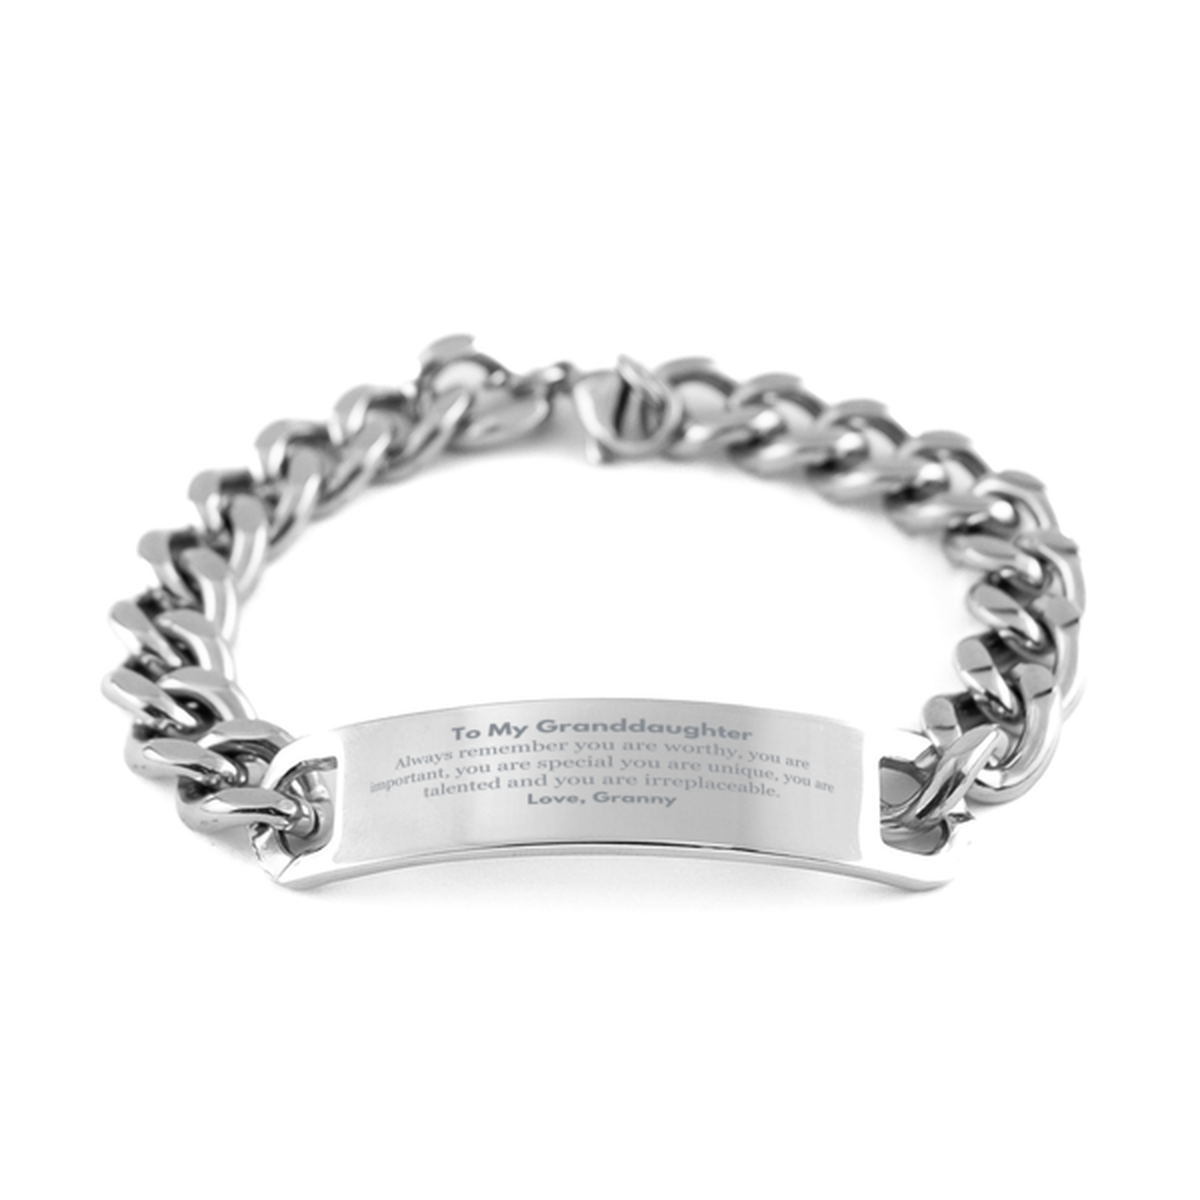 Granddaughter Birthday Gifts from Granny, Inspirational Cuban Chain Stainless Steel Bracelet for Granddaughter Christmas Graduation Gifts for Granddaughter Always remember you are worthy, you are important. Love, Granny